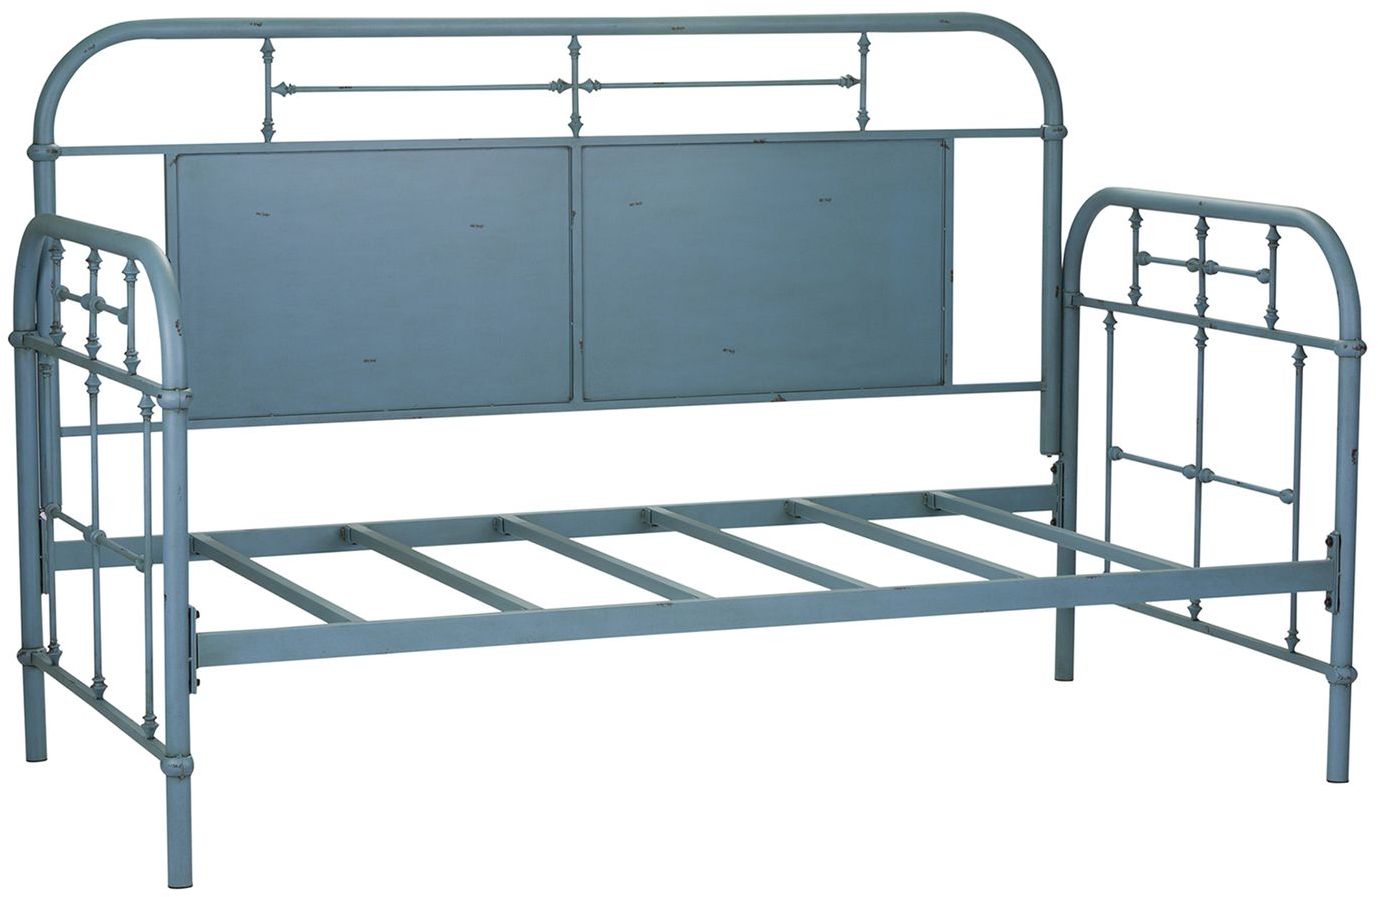 Liberty Furniture Vintage Blue Twin Metal Day Youth Bed